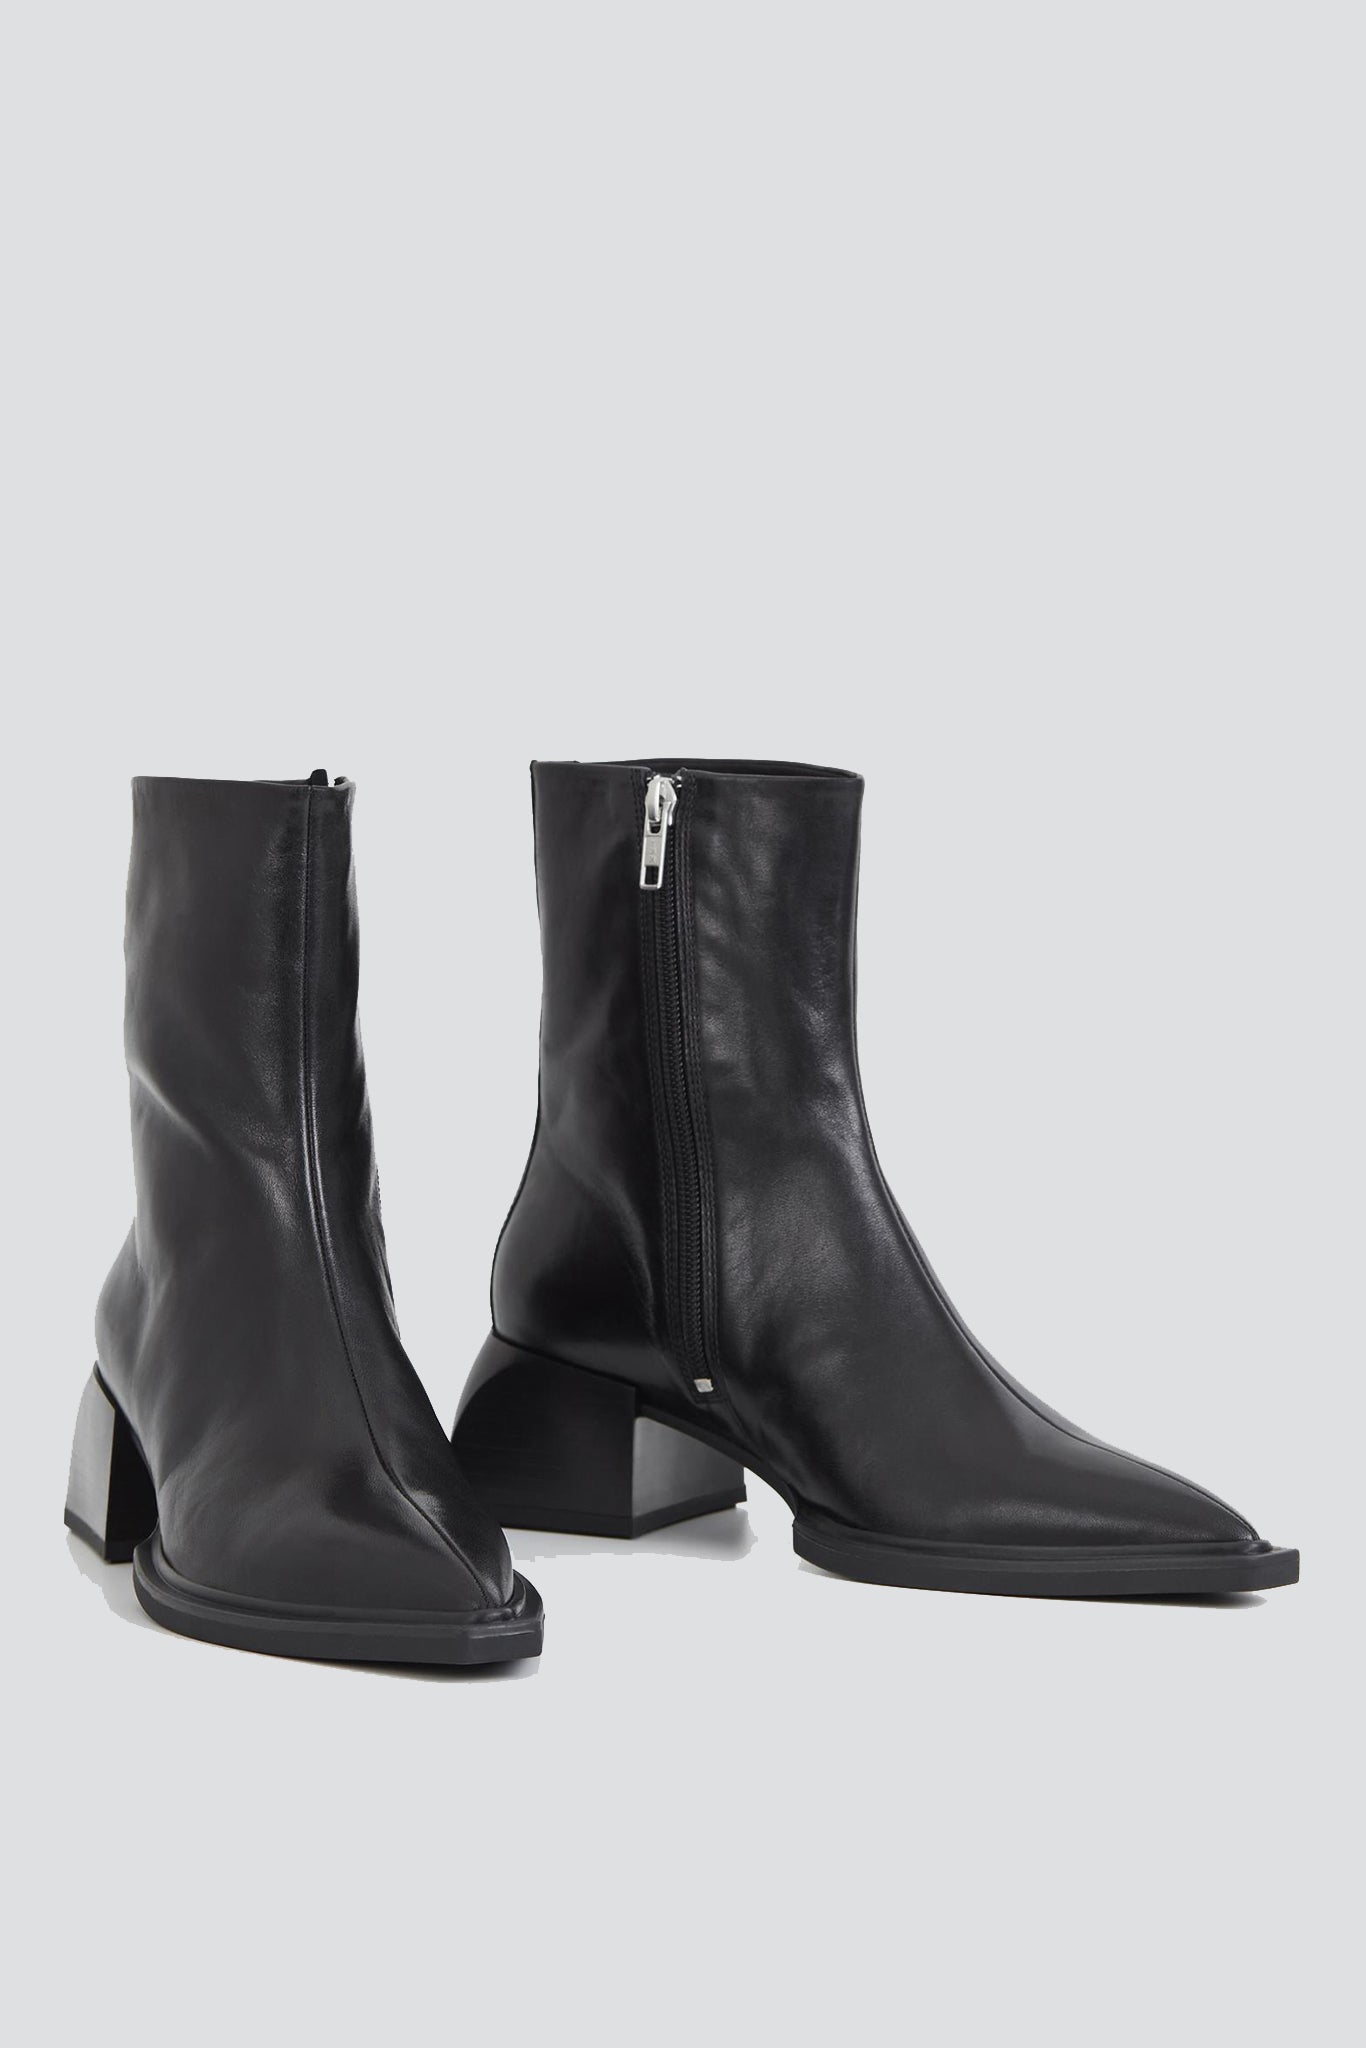 Women's Boots, Ankle Boots, Riding Boots, Over-the-Knee Boots - VIVAIA